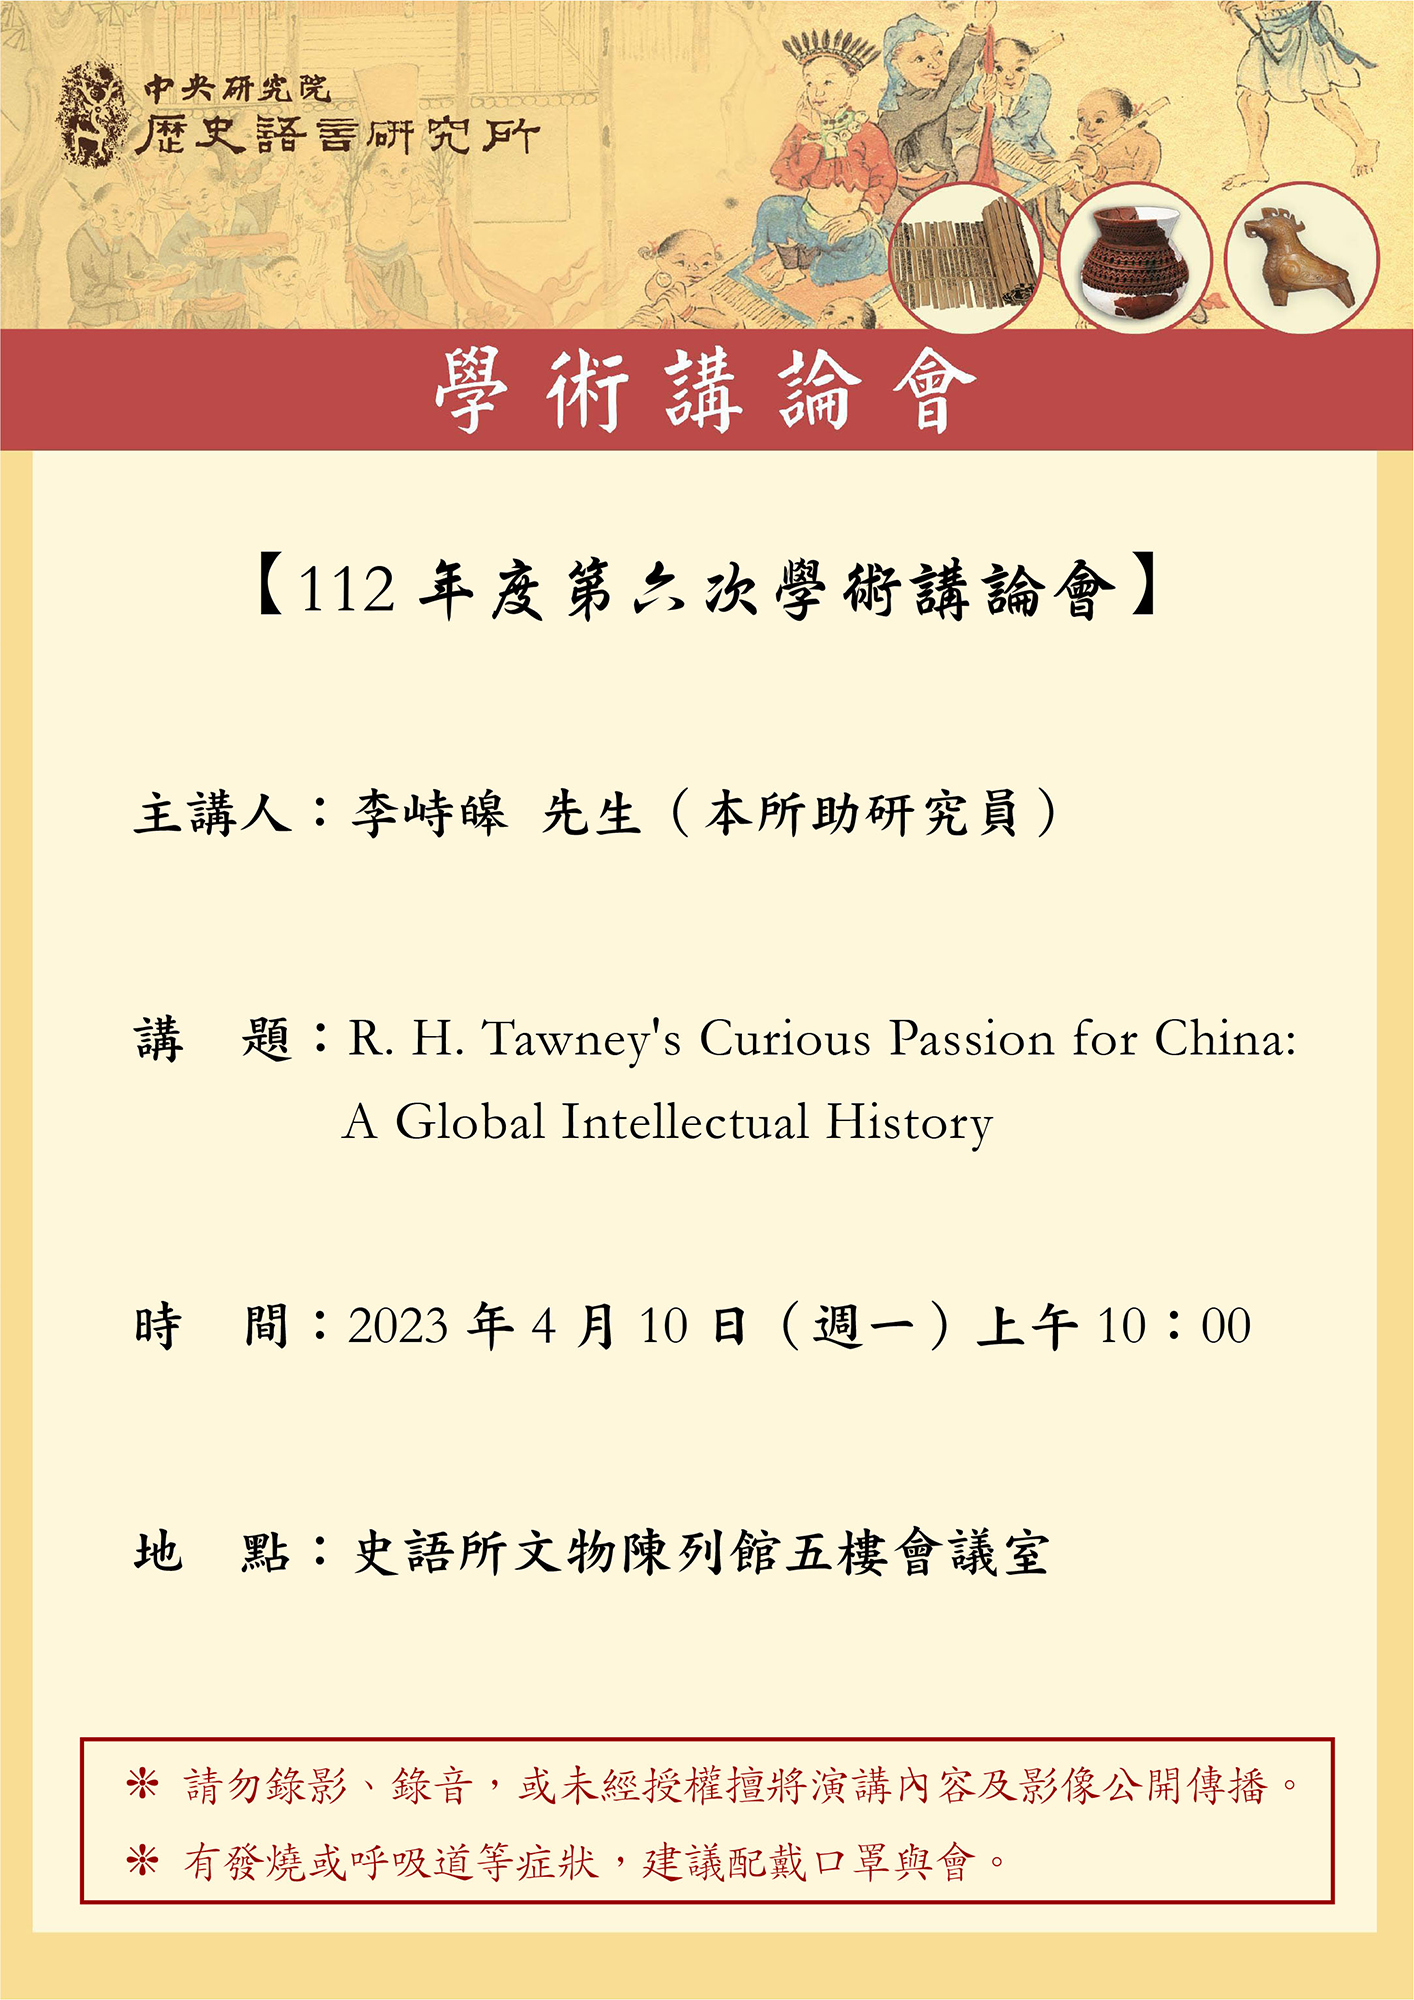 R. H. Tawney's Curious Passion for China: A Global Intellectual History